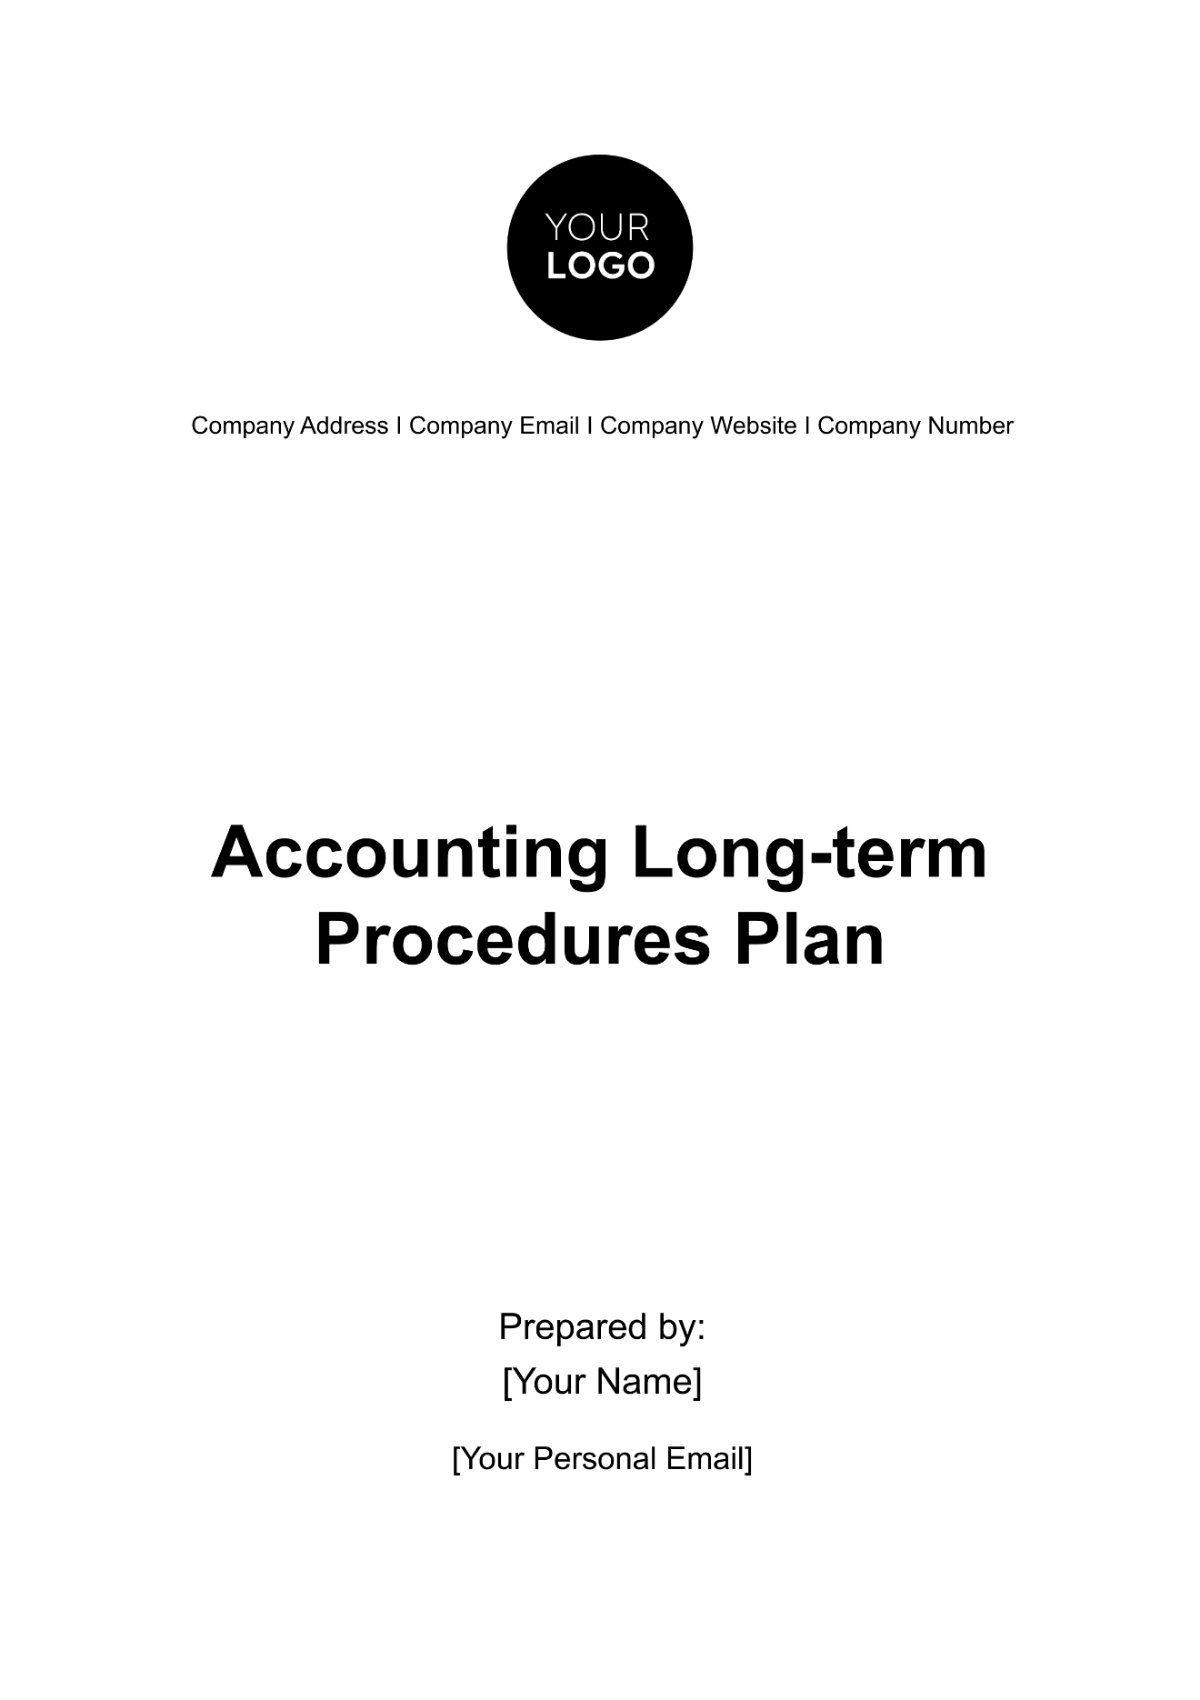 Free Accounting Long-term Procedures Plan Template